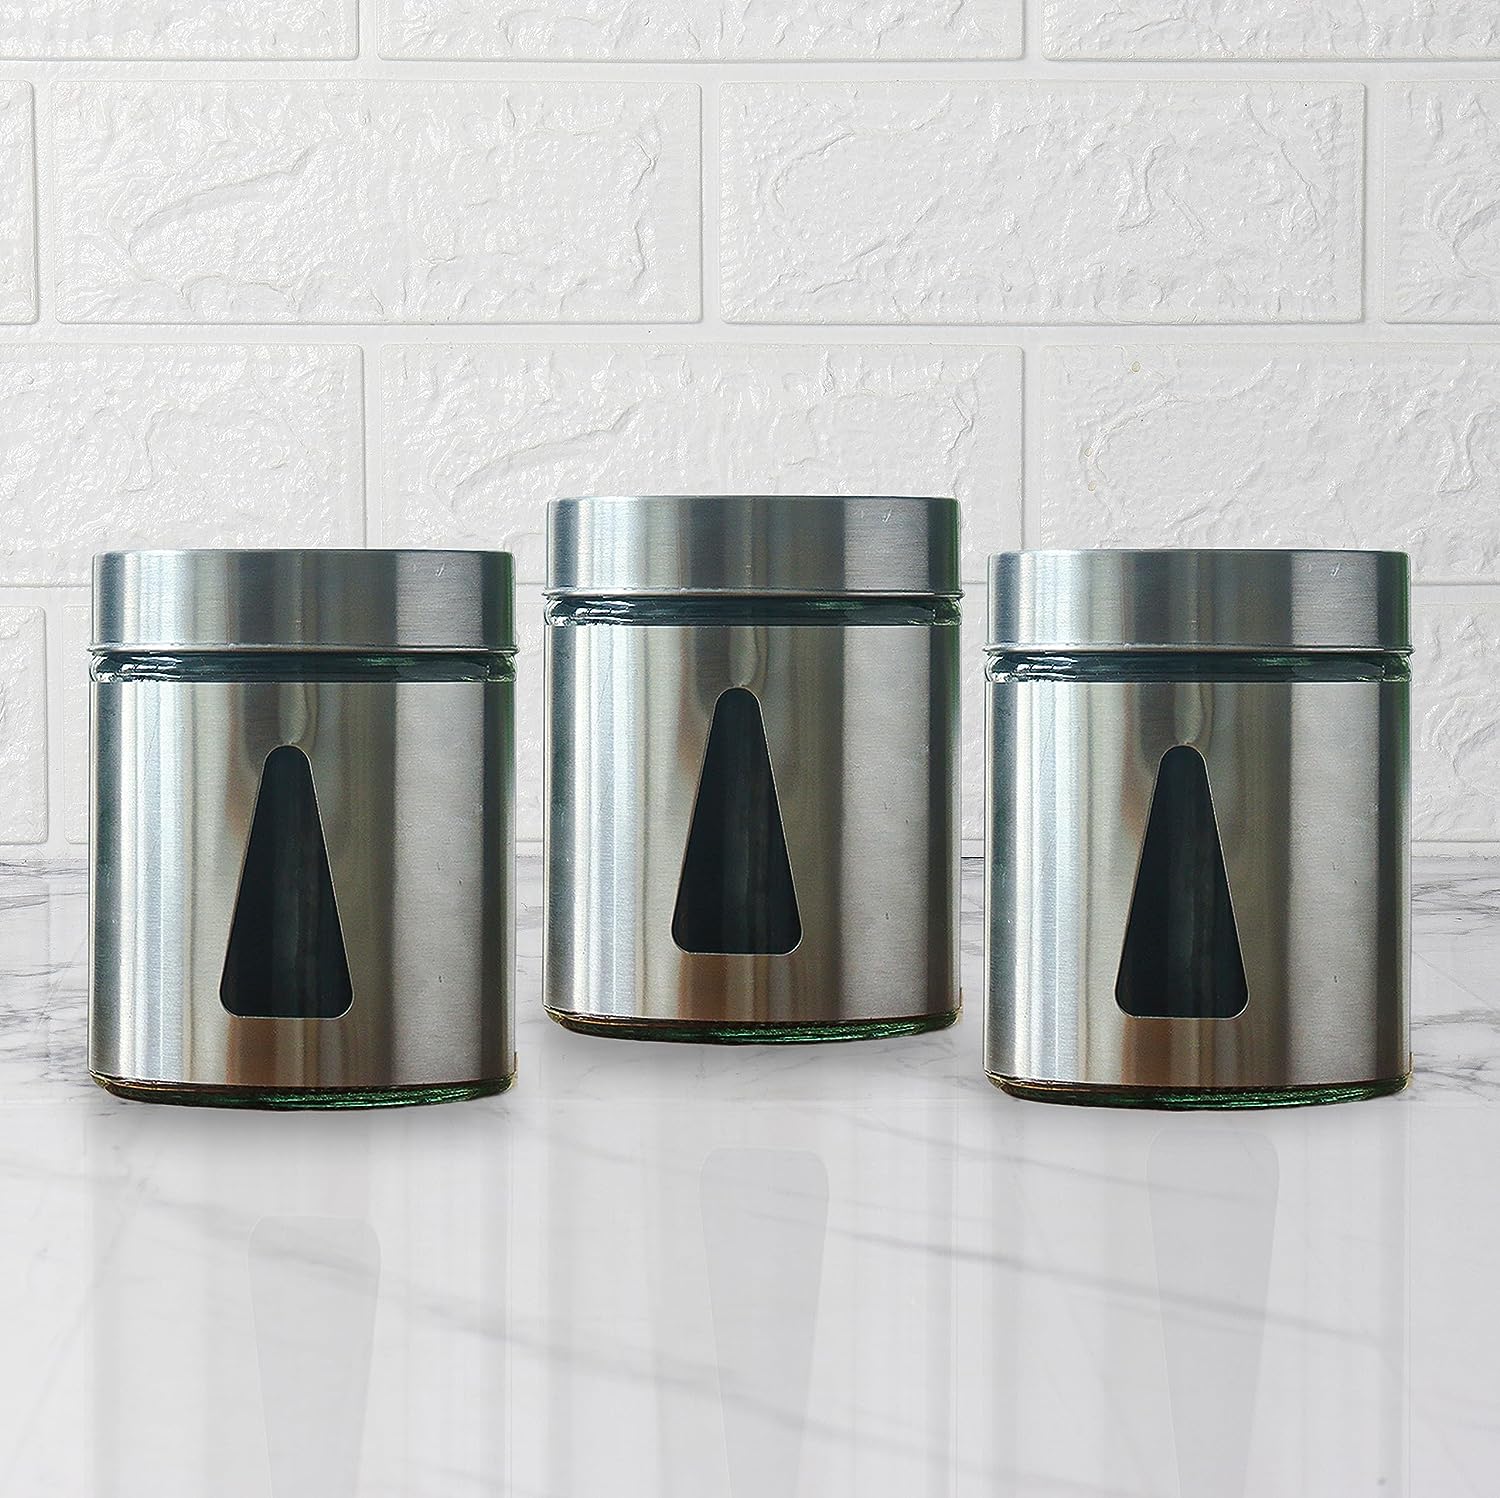 Femora Steel Jar for Kitchen Storage with Triangle Glass Window and Stainless Steel Cover, 1000 ml, Set Of 3, Free Replacement of Lids